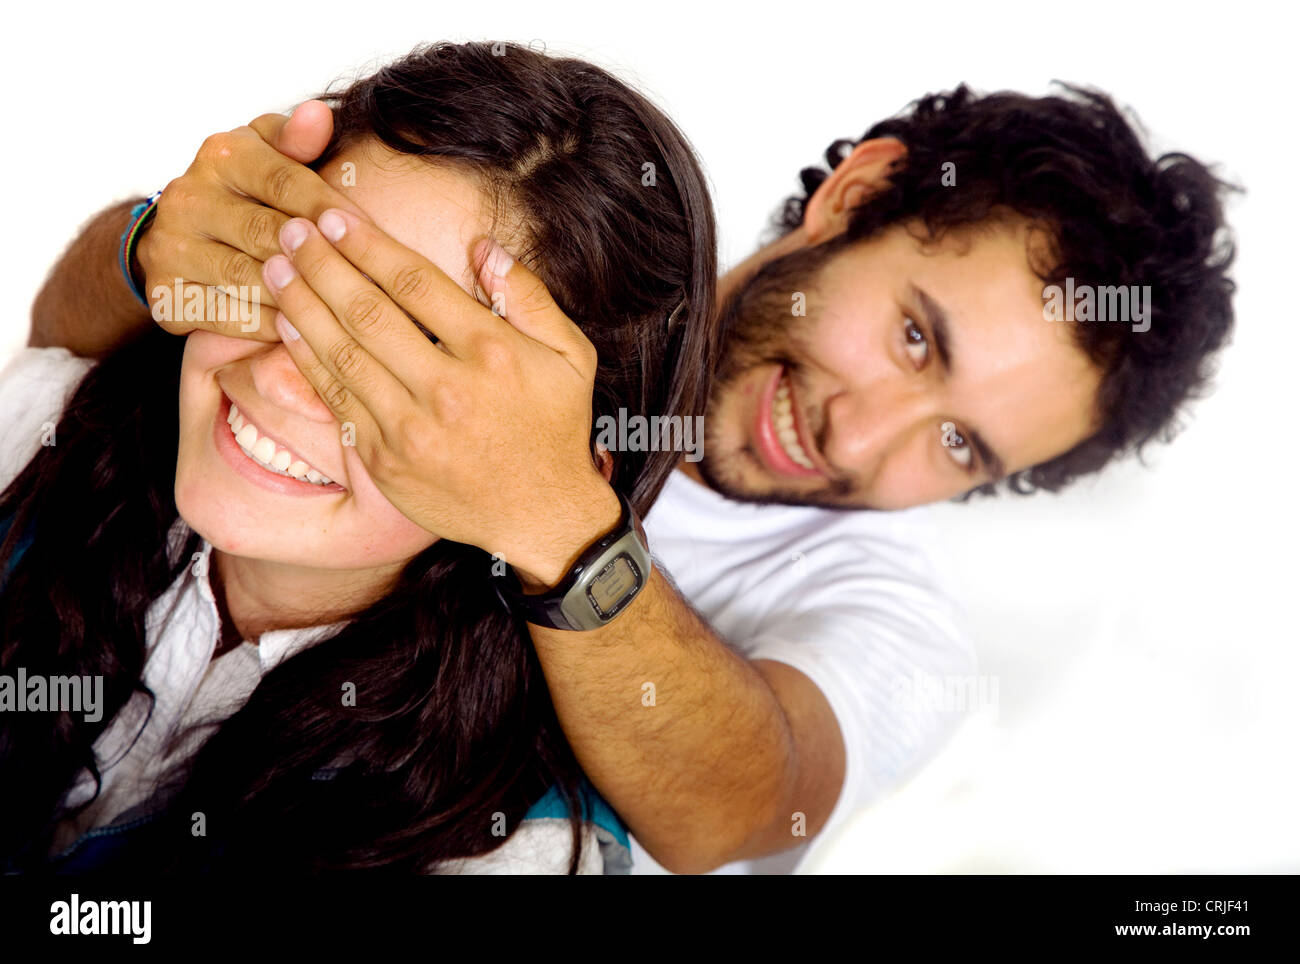 man covering a girls eyes to see if she can guess who is behind her Stock Photo